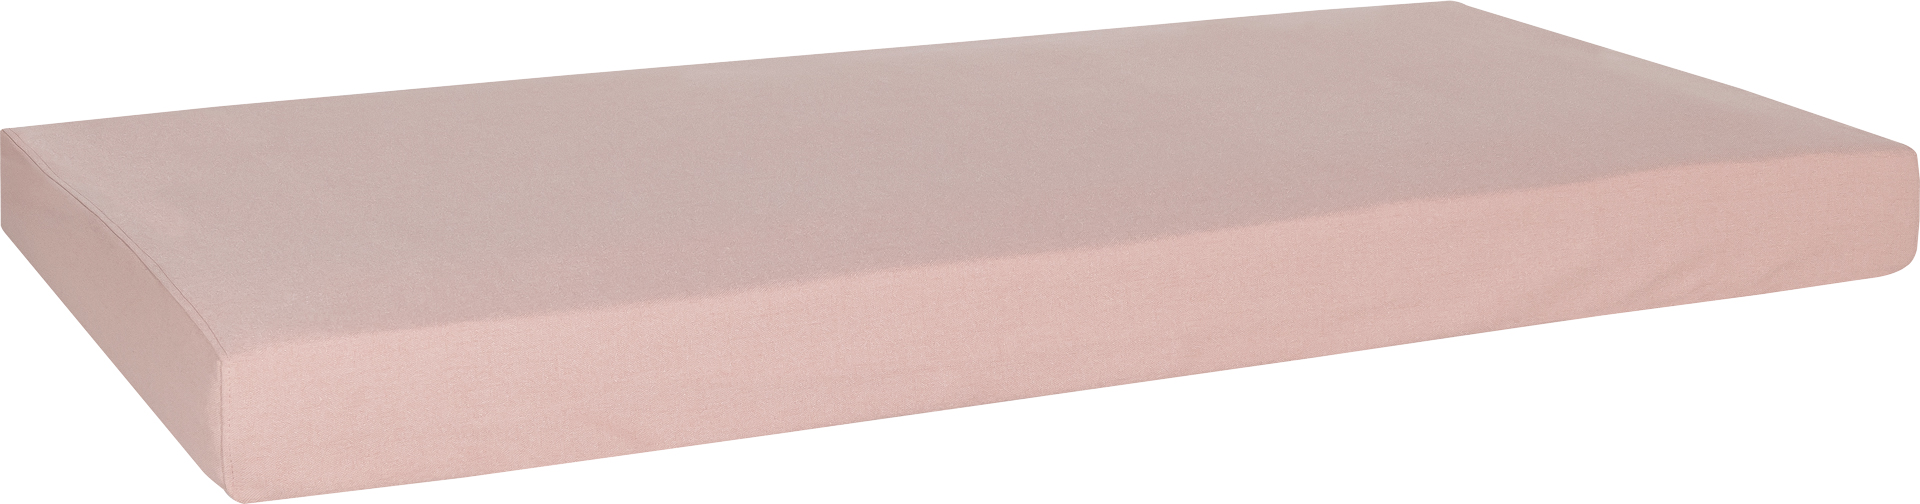 Mattress Breakdance 90x200 with Gemino pink cover